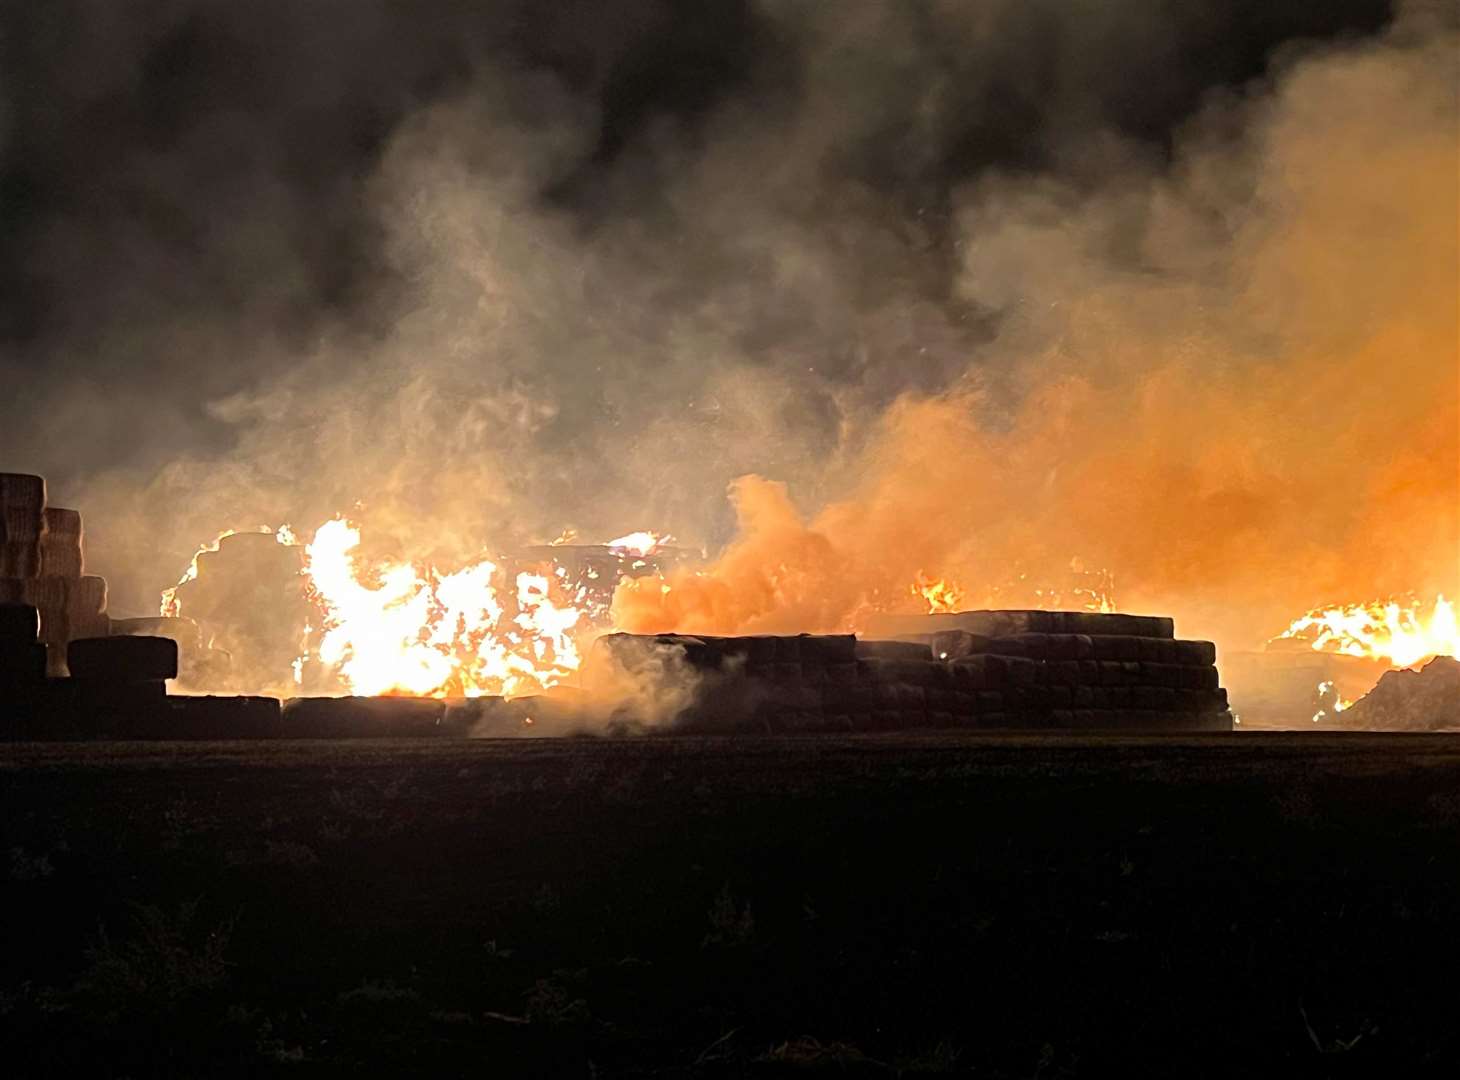 Two cattle barns are understood to have been destroyed by the fire at Elmtree Farm in Sellindge. Credit: Sophie Alice Mort